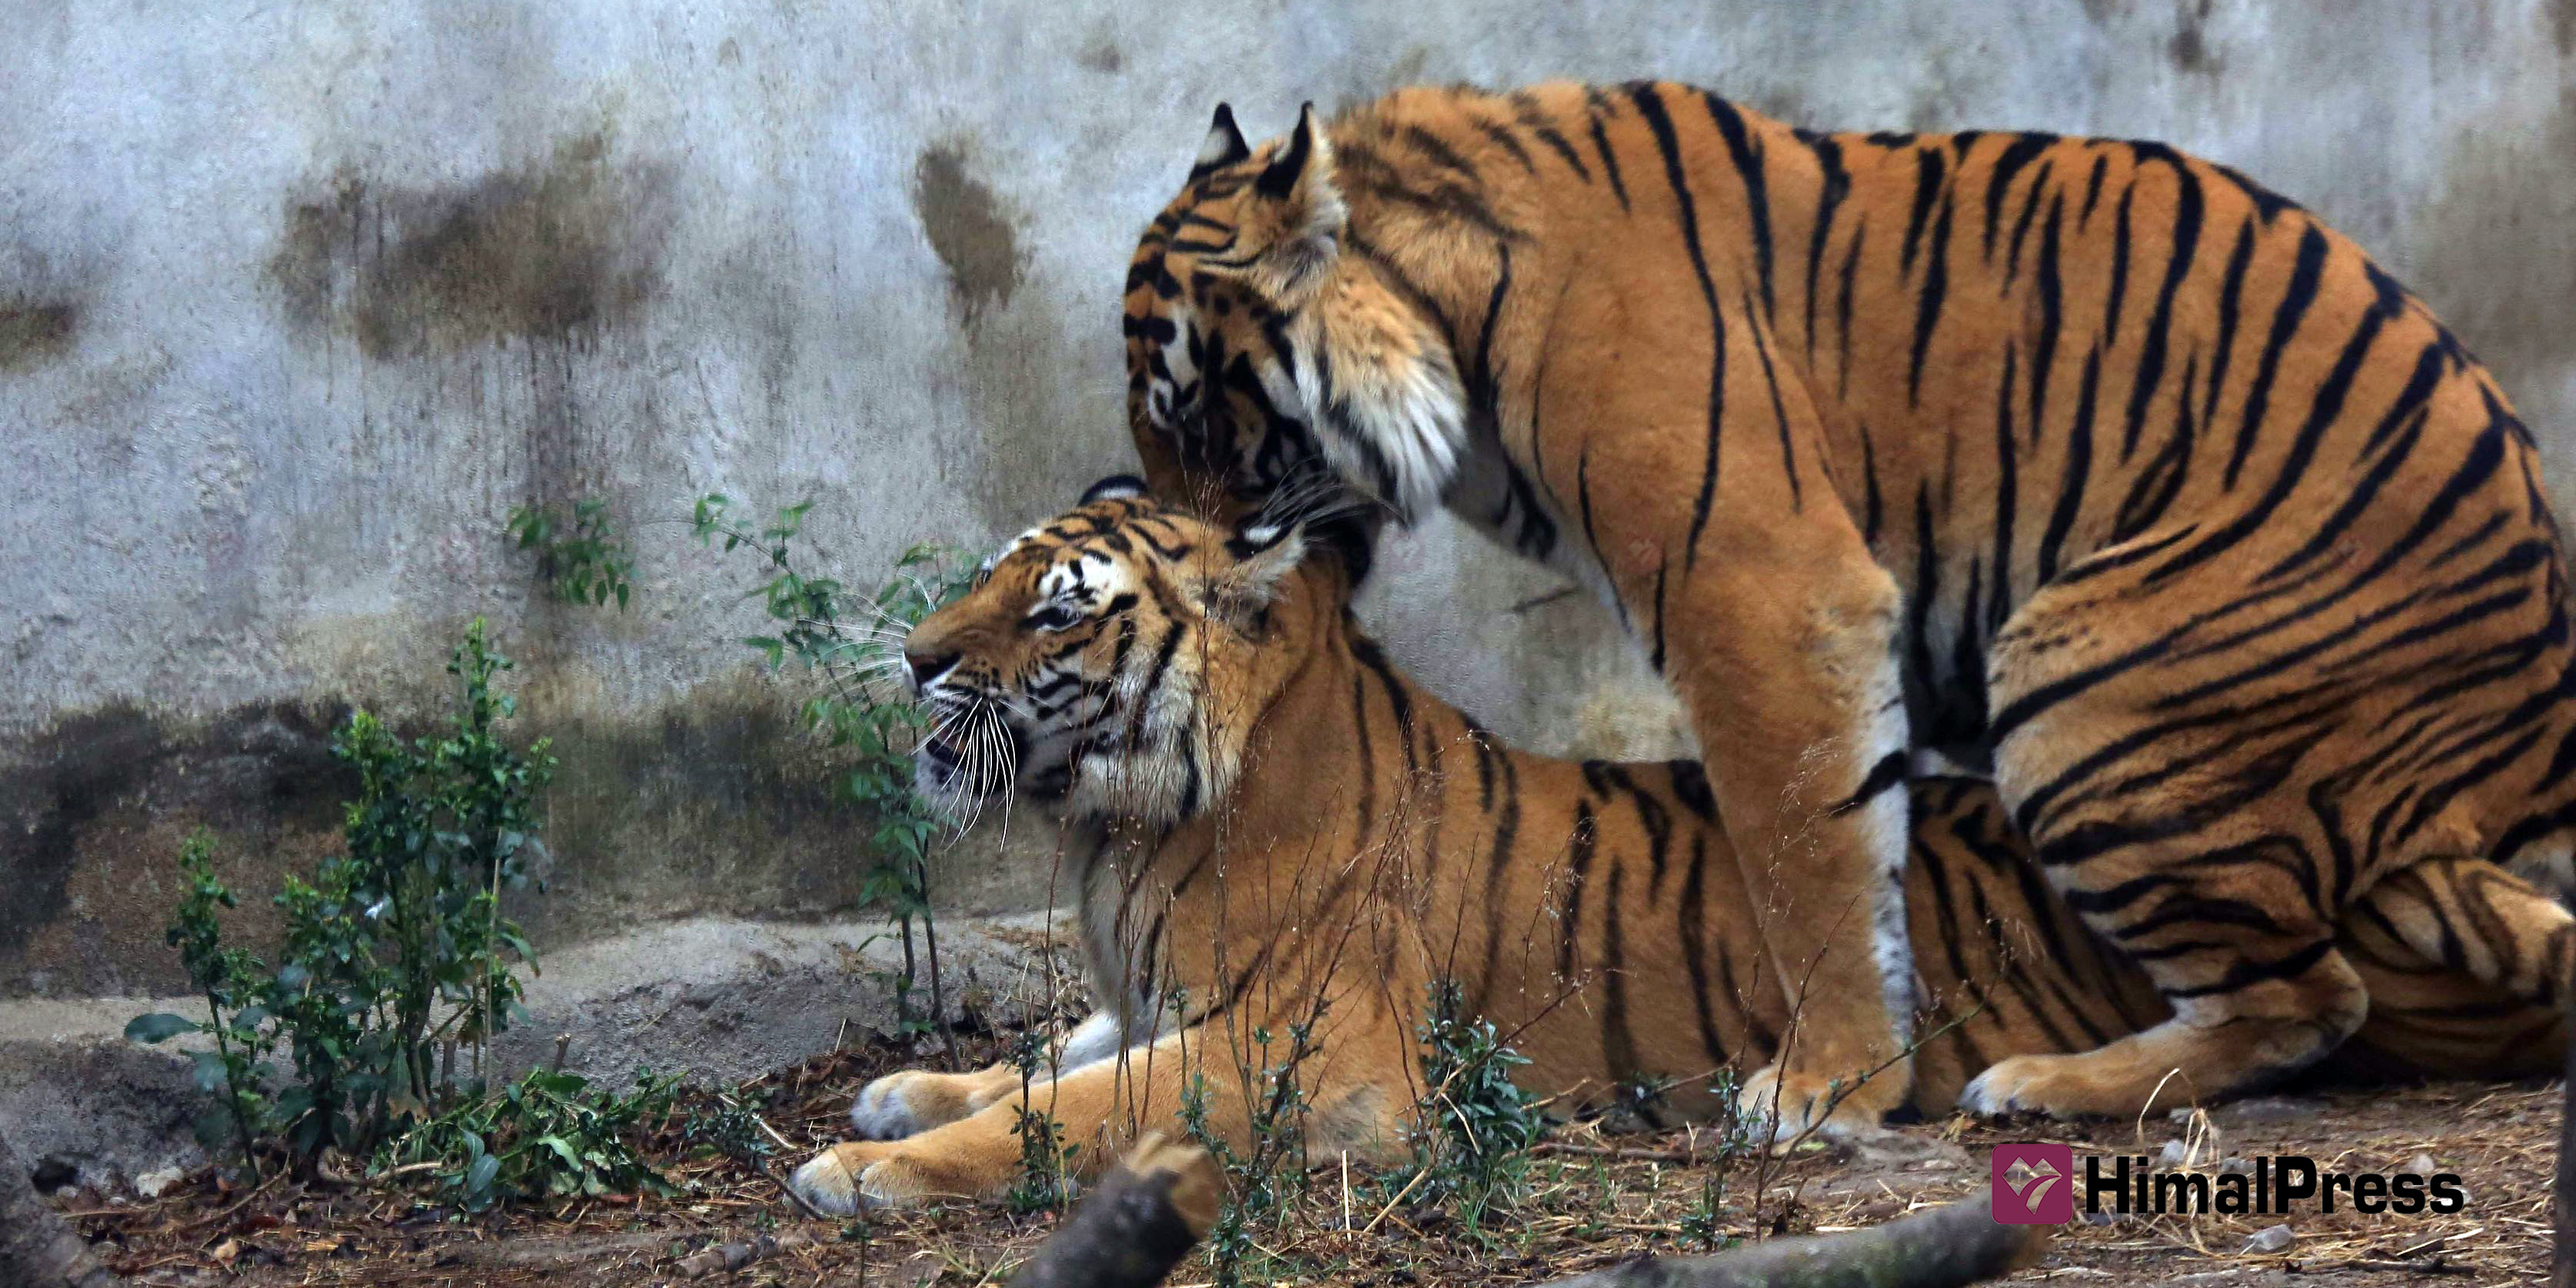 Tiger courtship at Central Zoo [In Pictures]